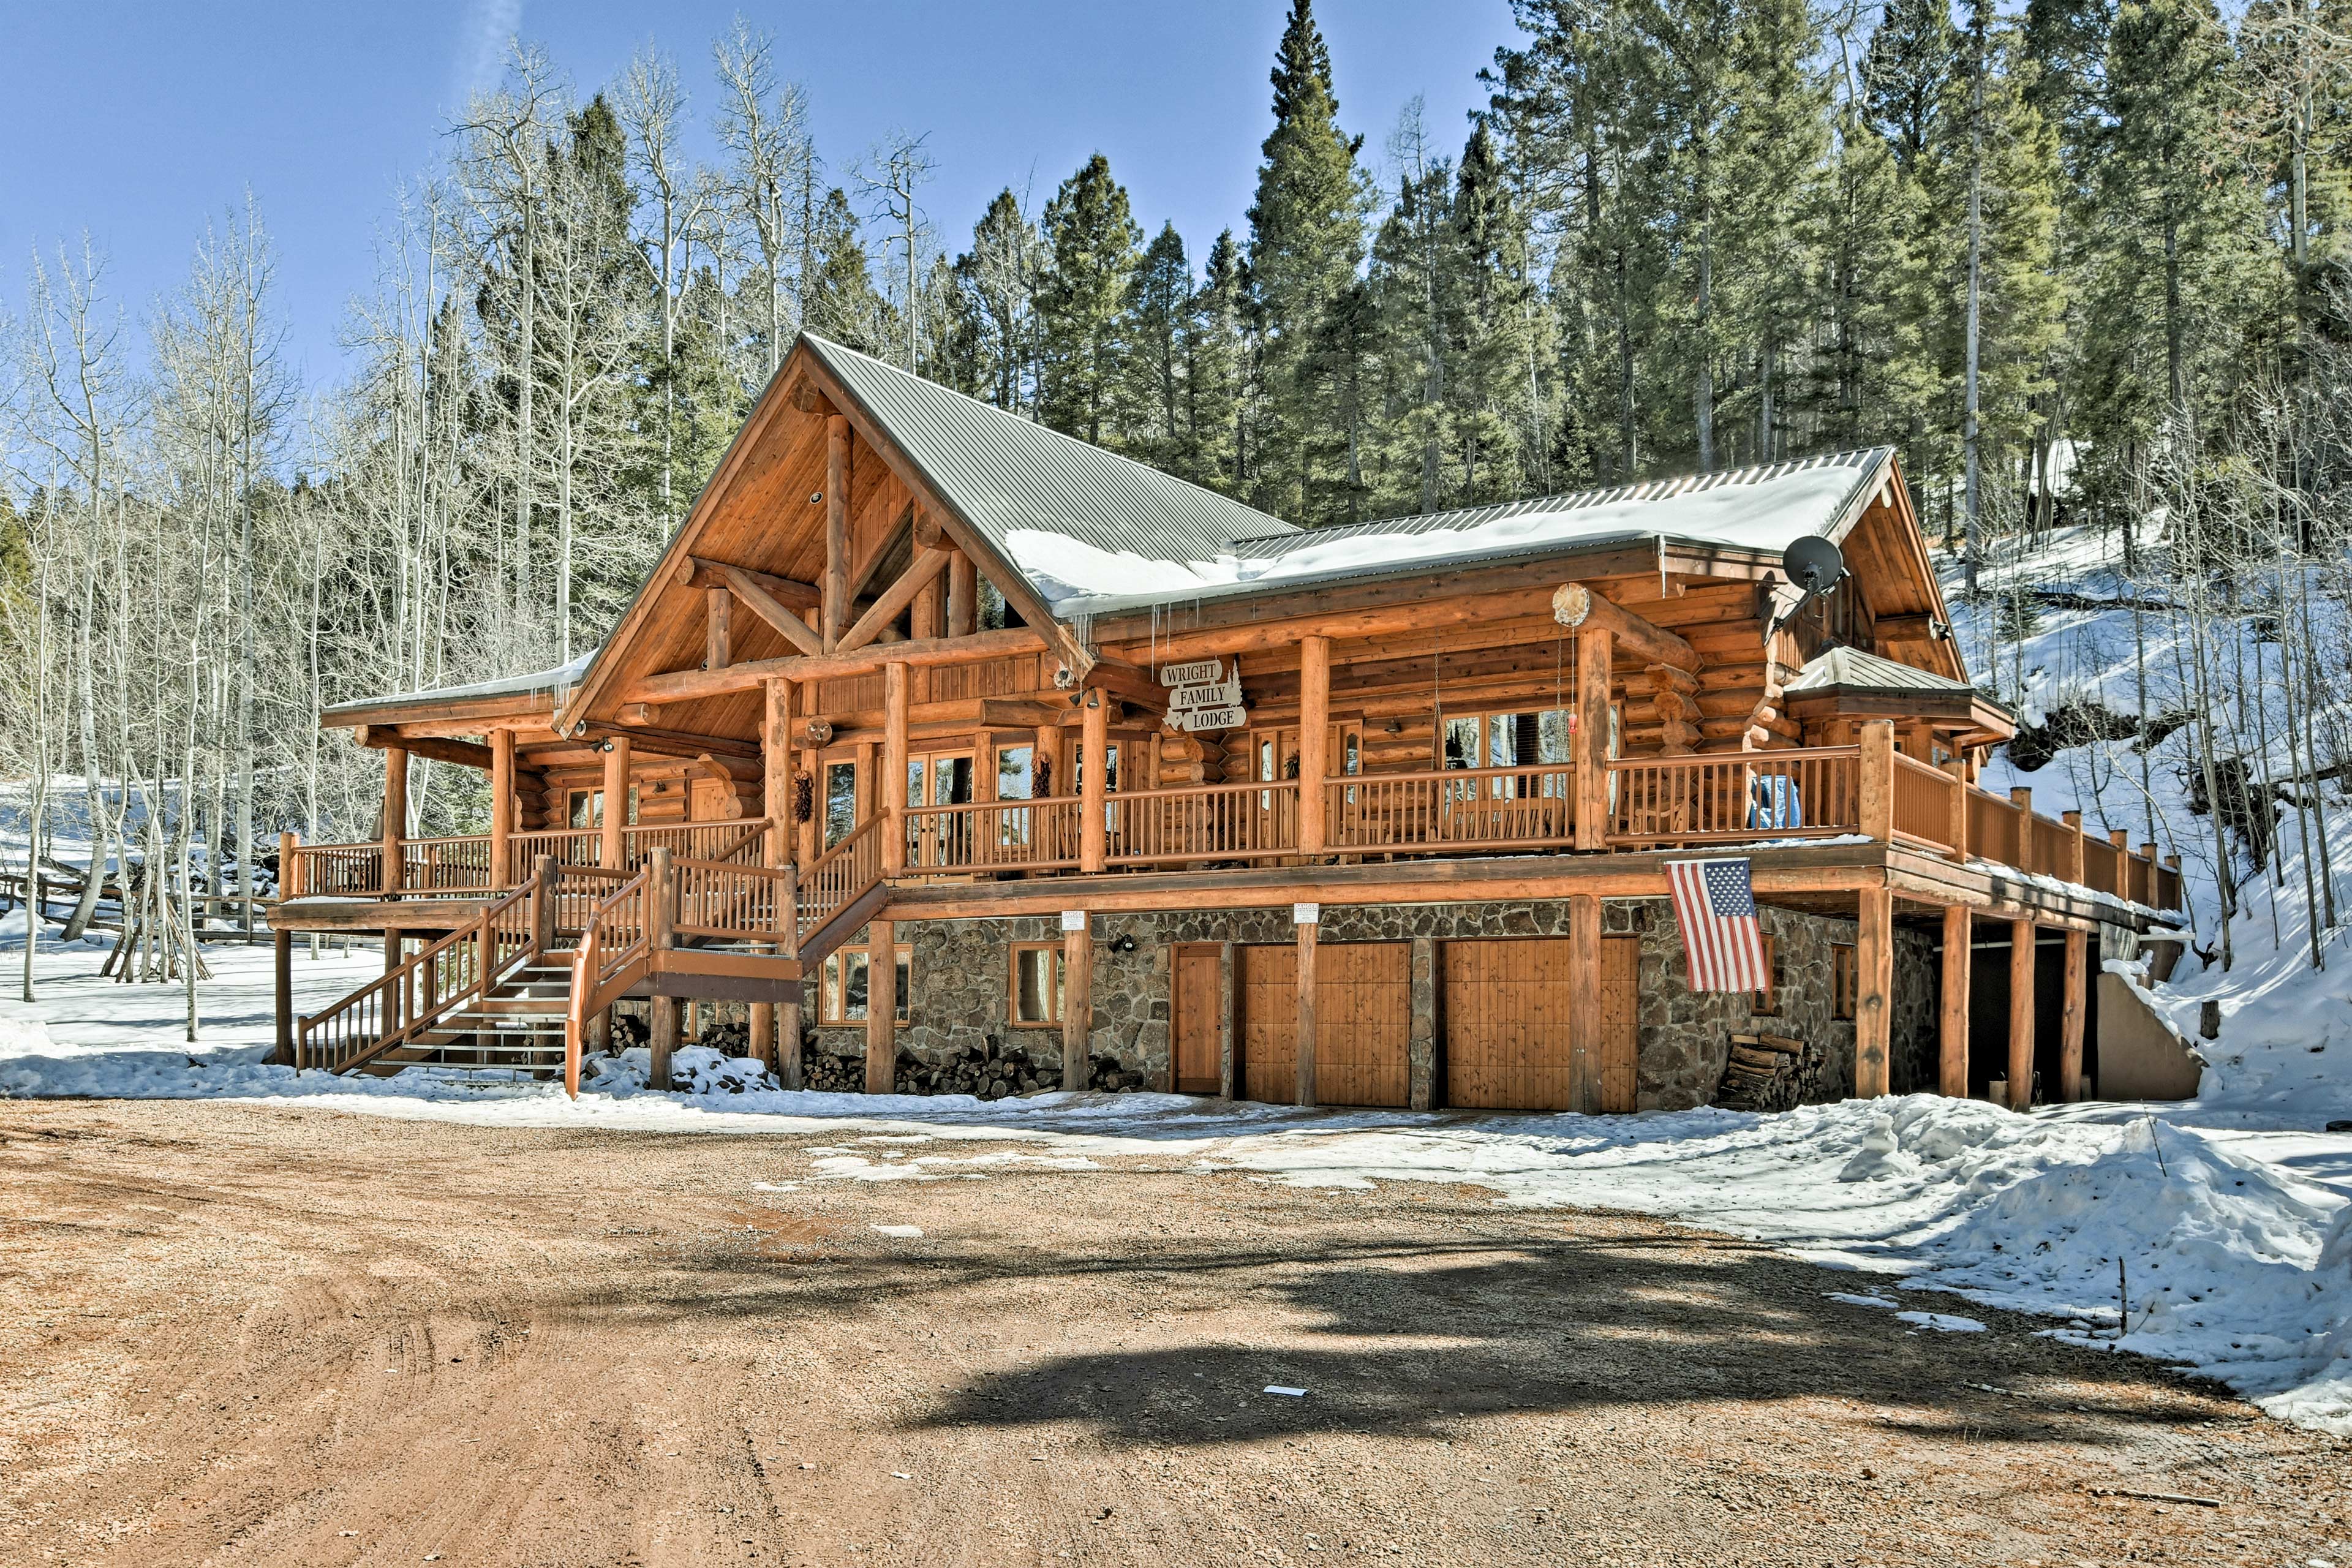 Listing photo for 148 N Panorama Way N. Way, OTHER, NM, Log Cabin home for sale